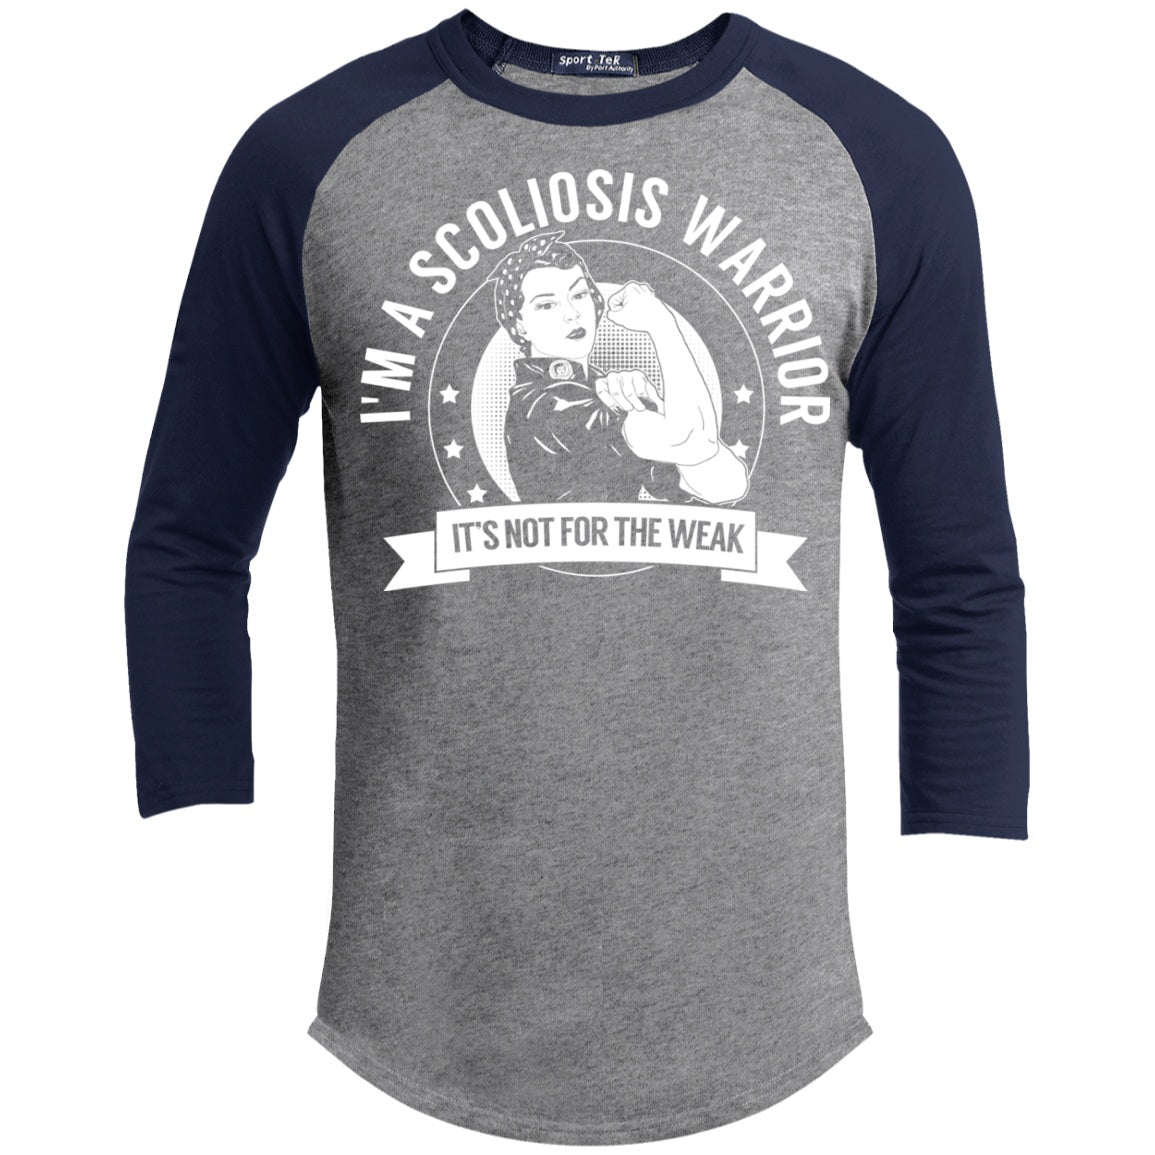 Scoliosis Warrior Not For The Weak Baseball Shirt - The Unchargeables